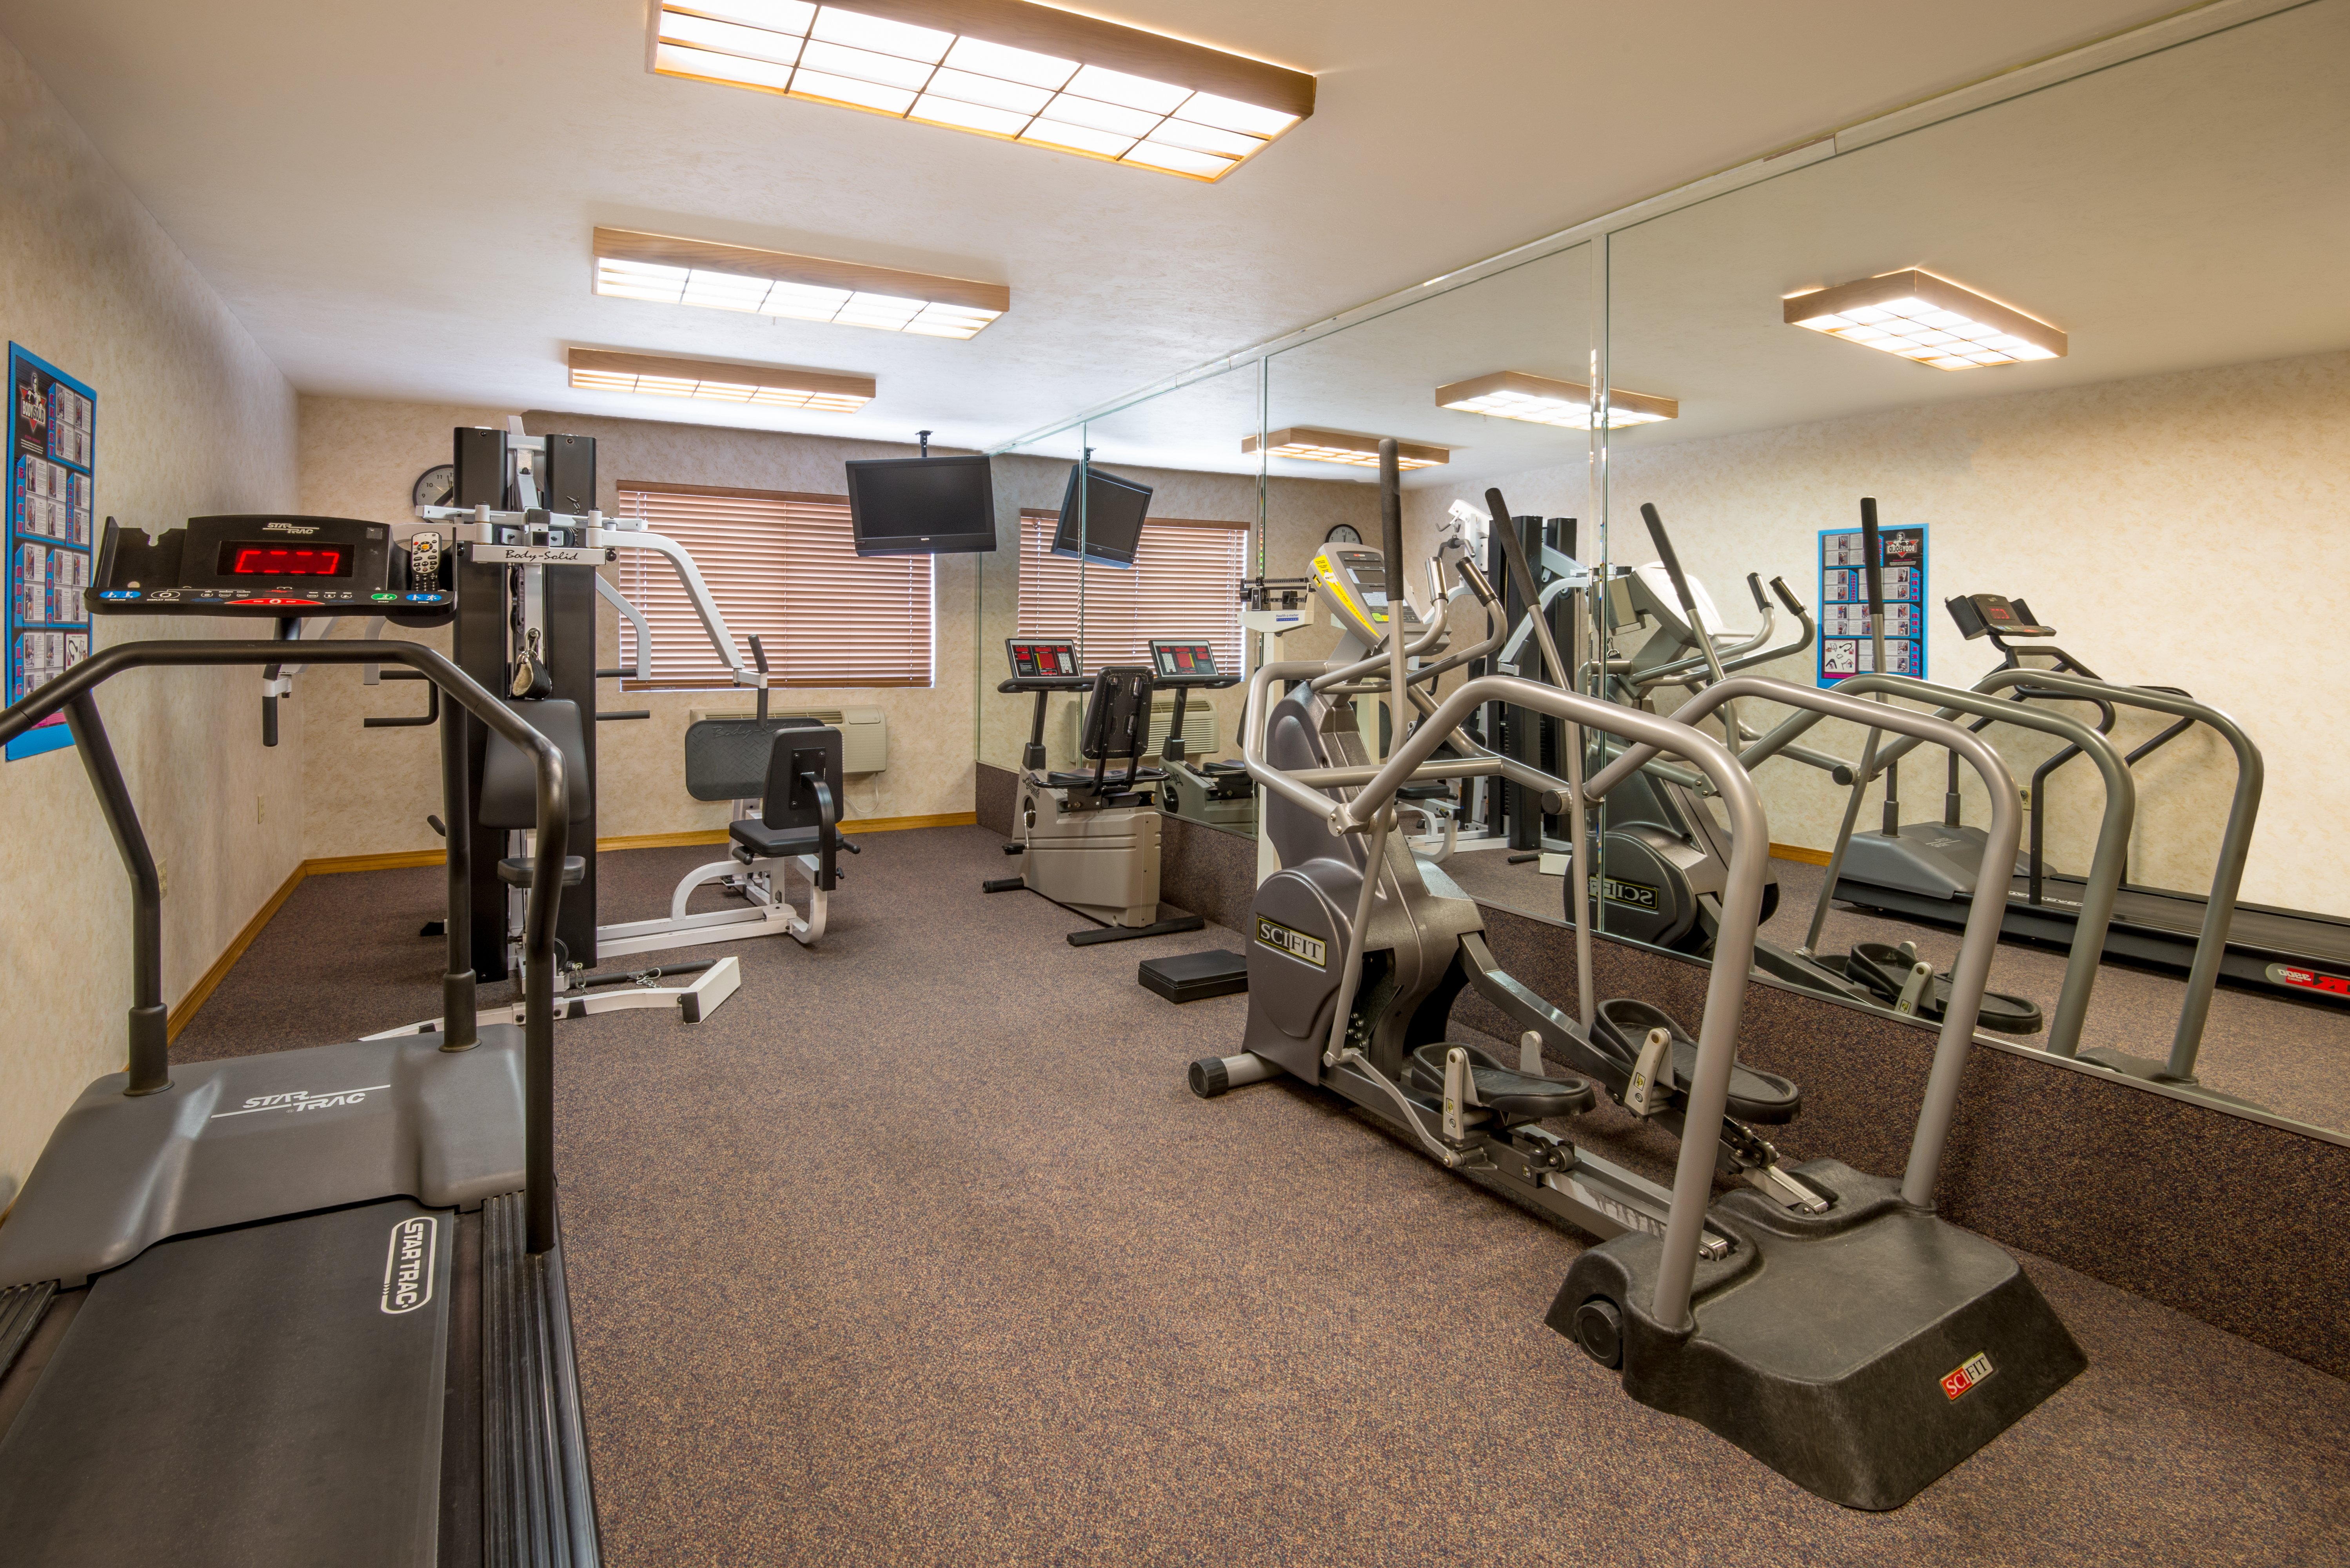 Work out in our well-equipped Fitness Center at our Raton NM hotel